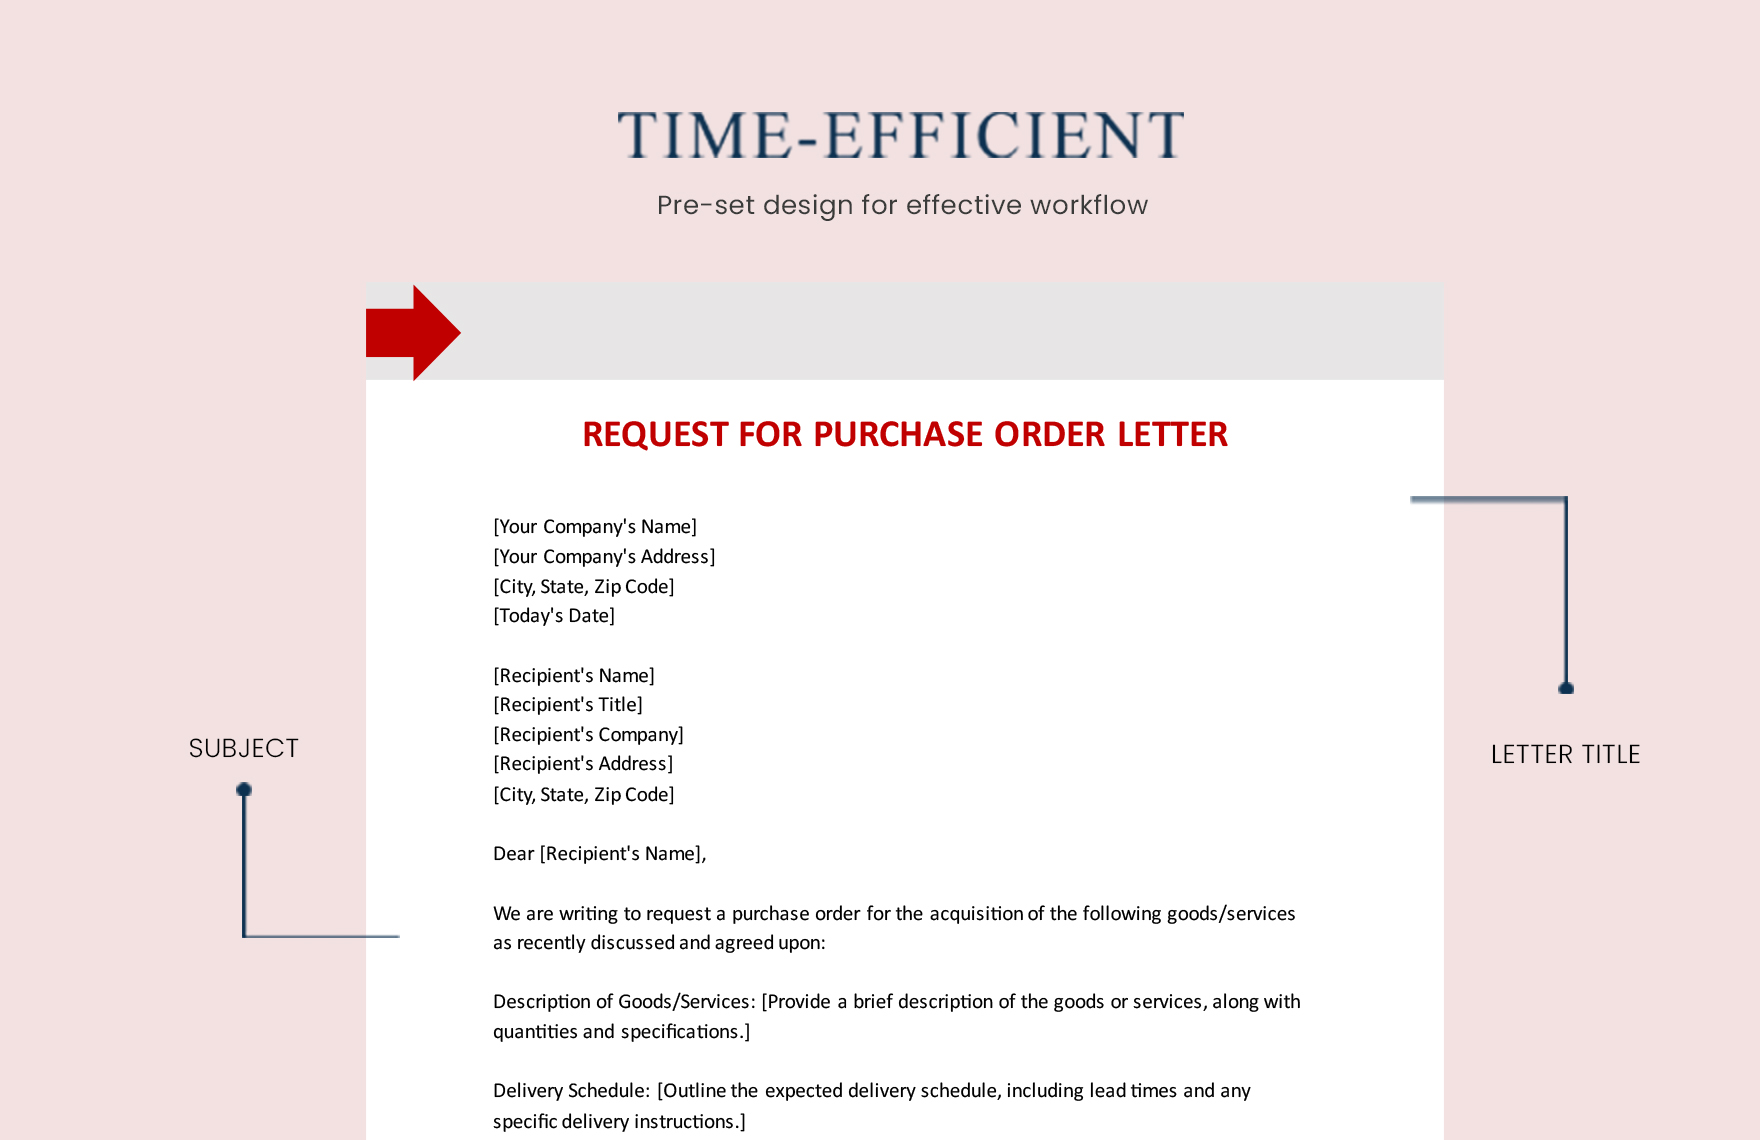 Request For Purchase Order Letter